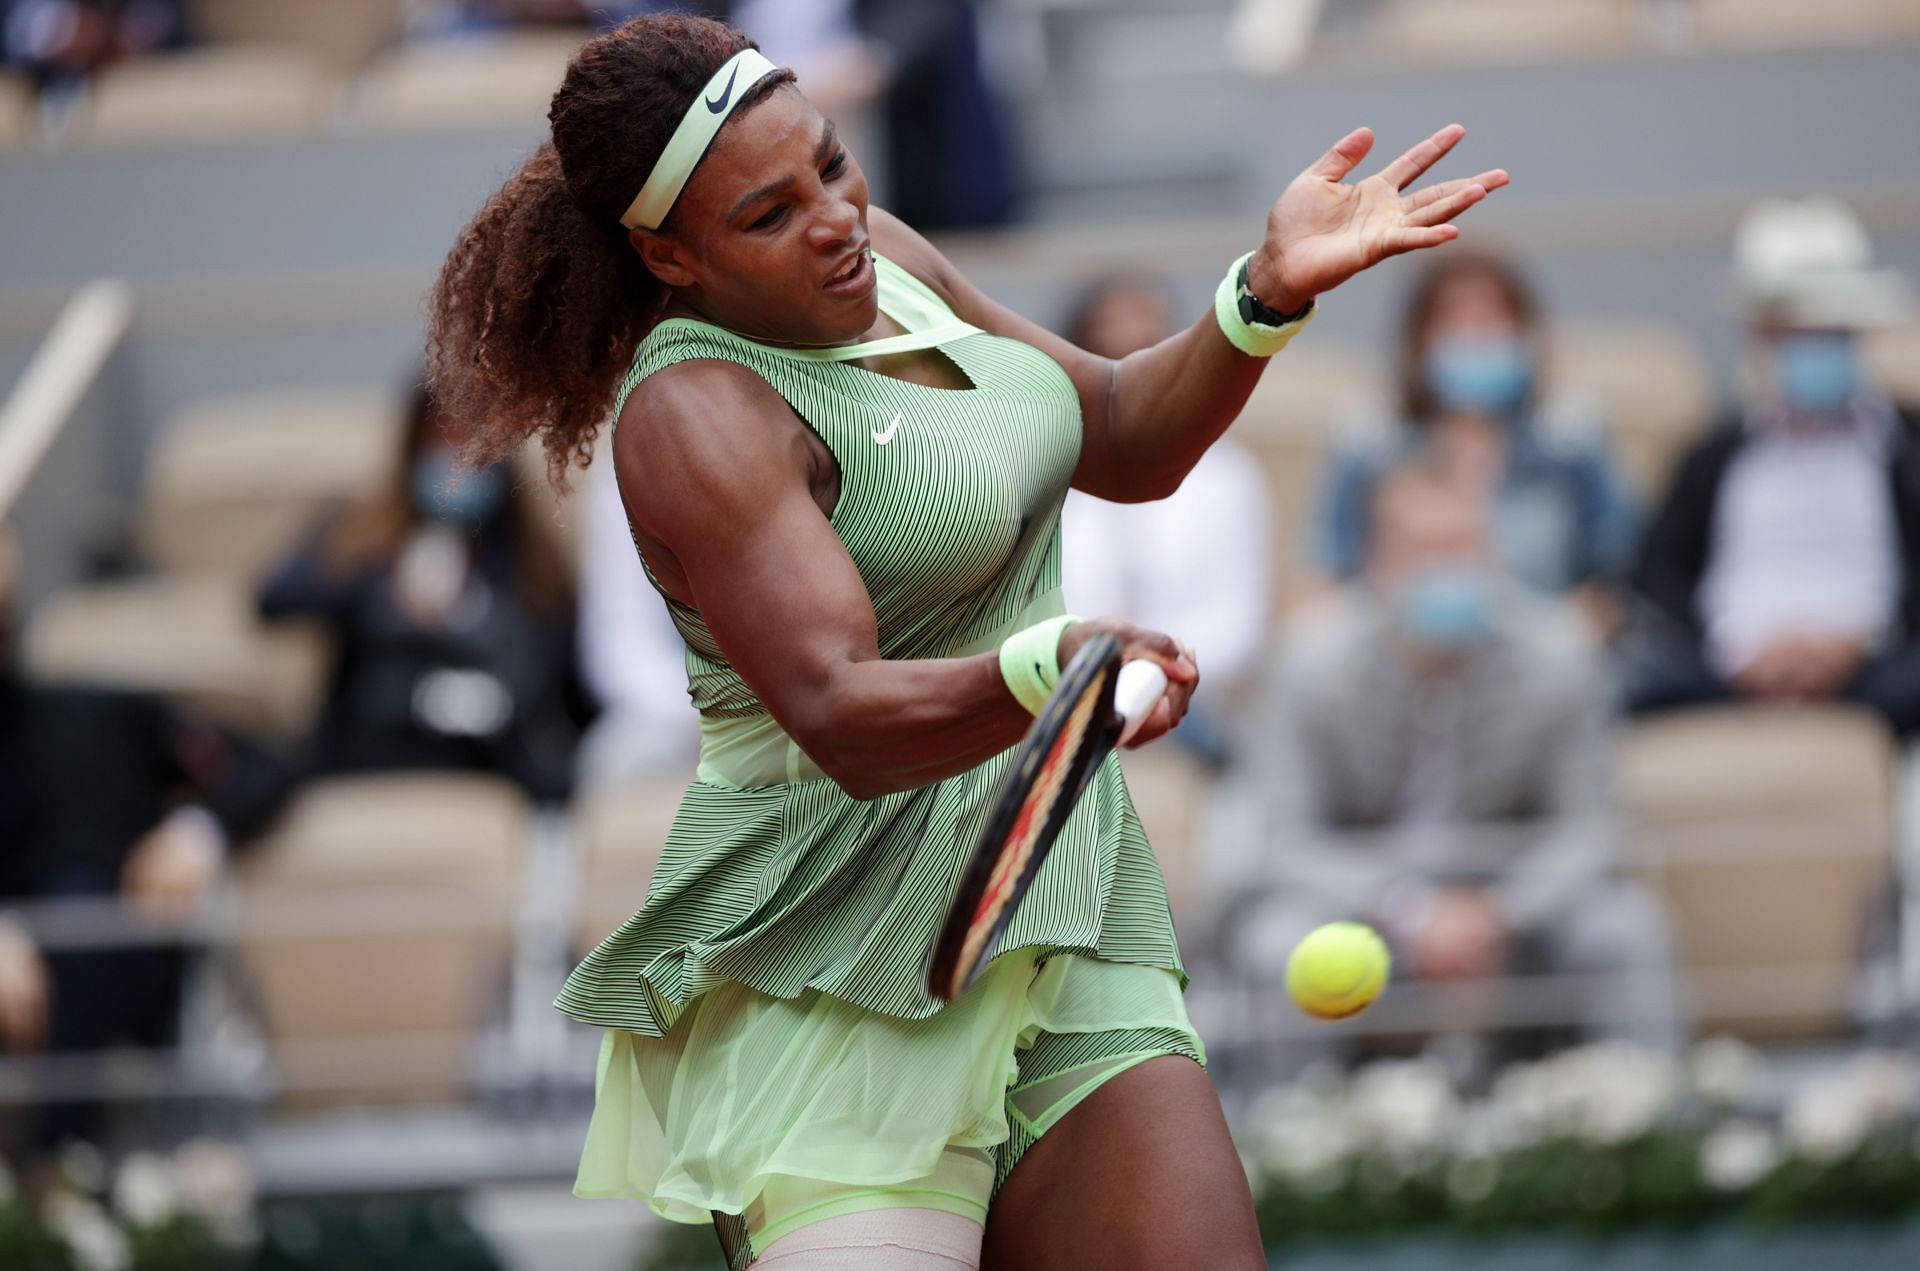 Williams&#039; ranking dropped to 244th after the Australian Open